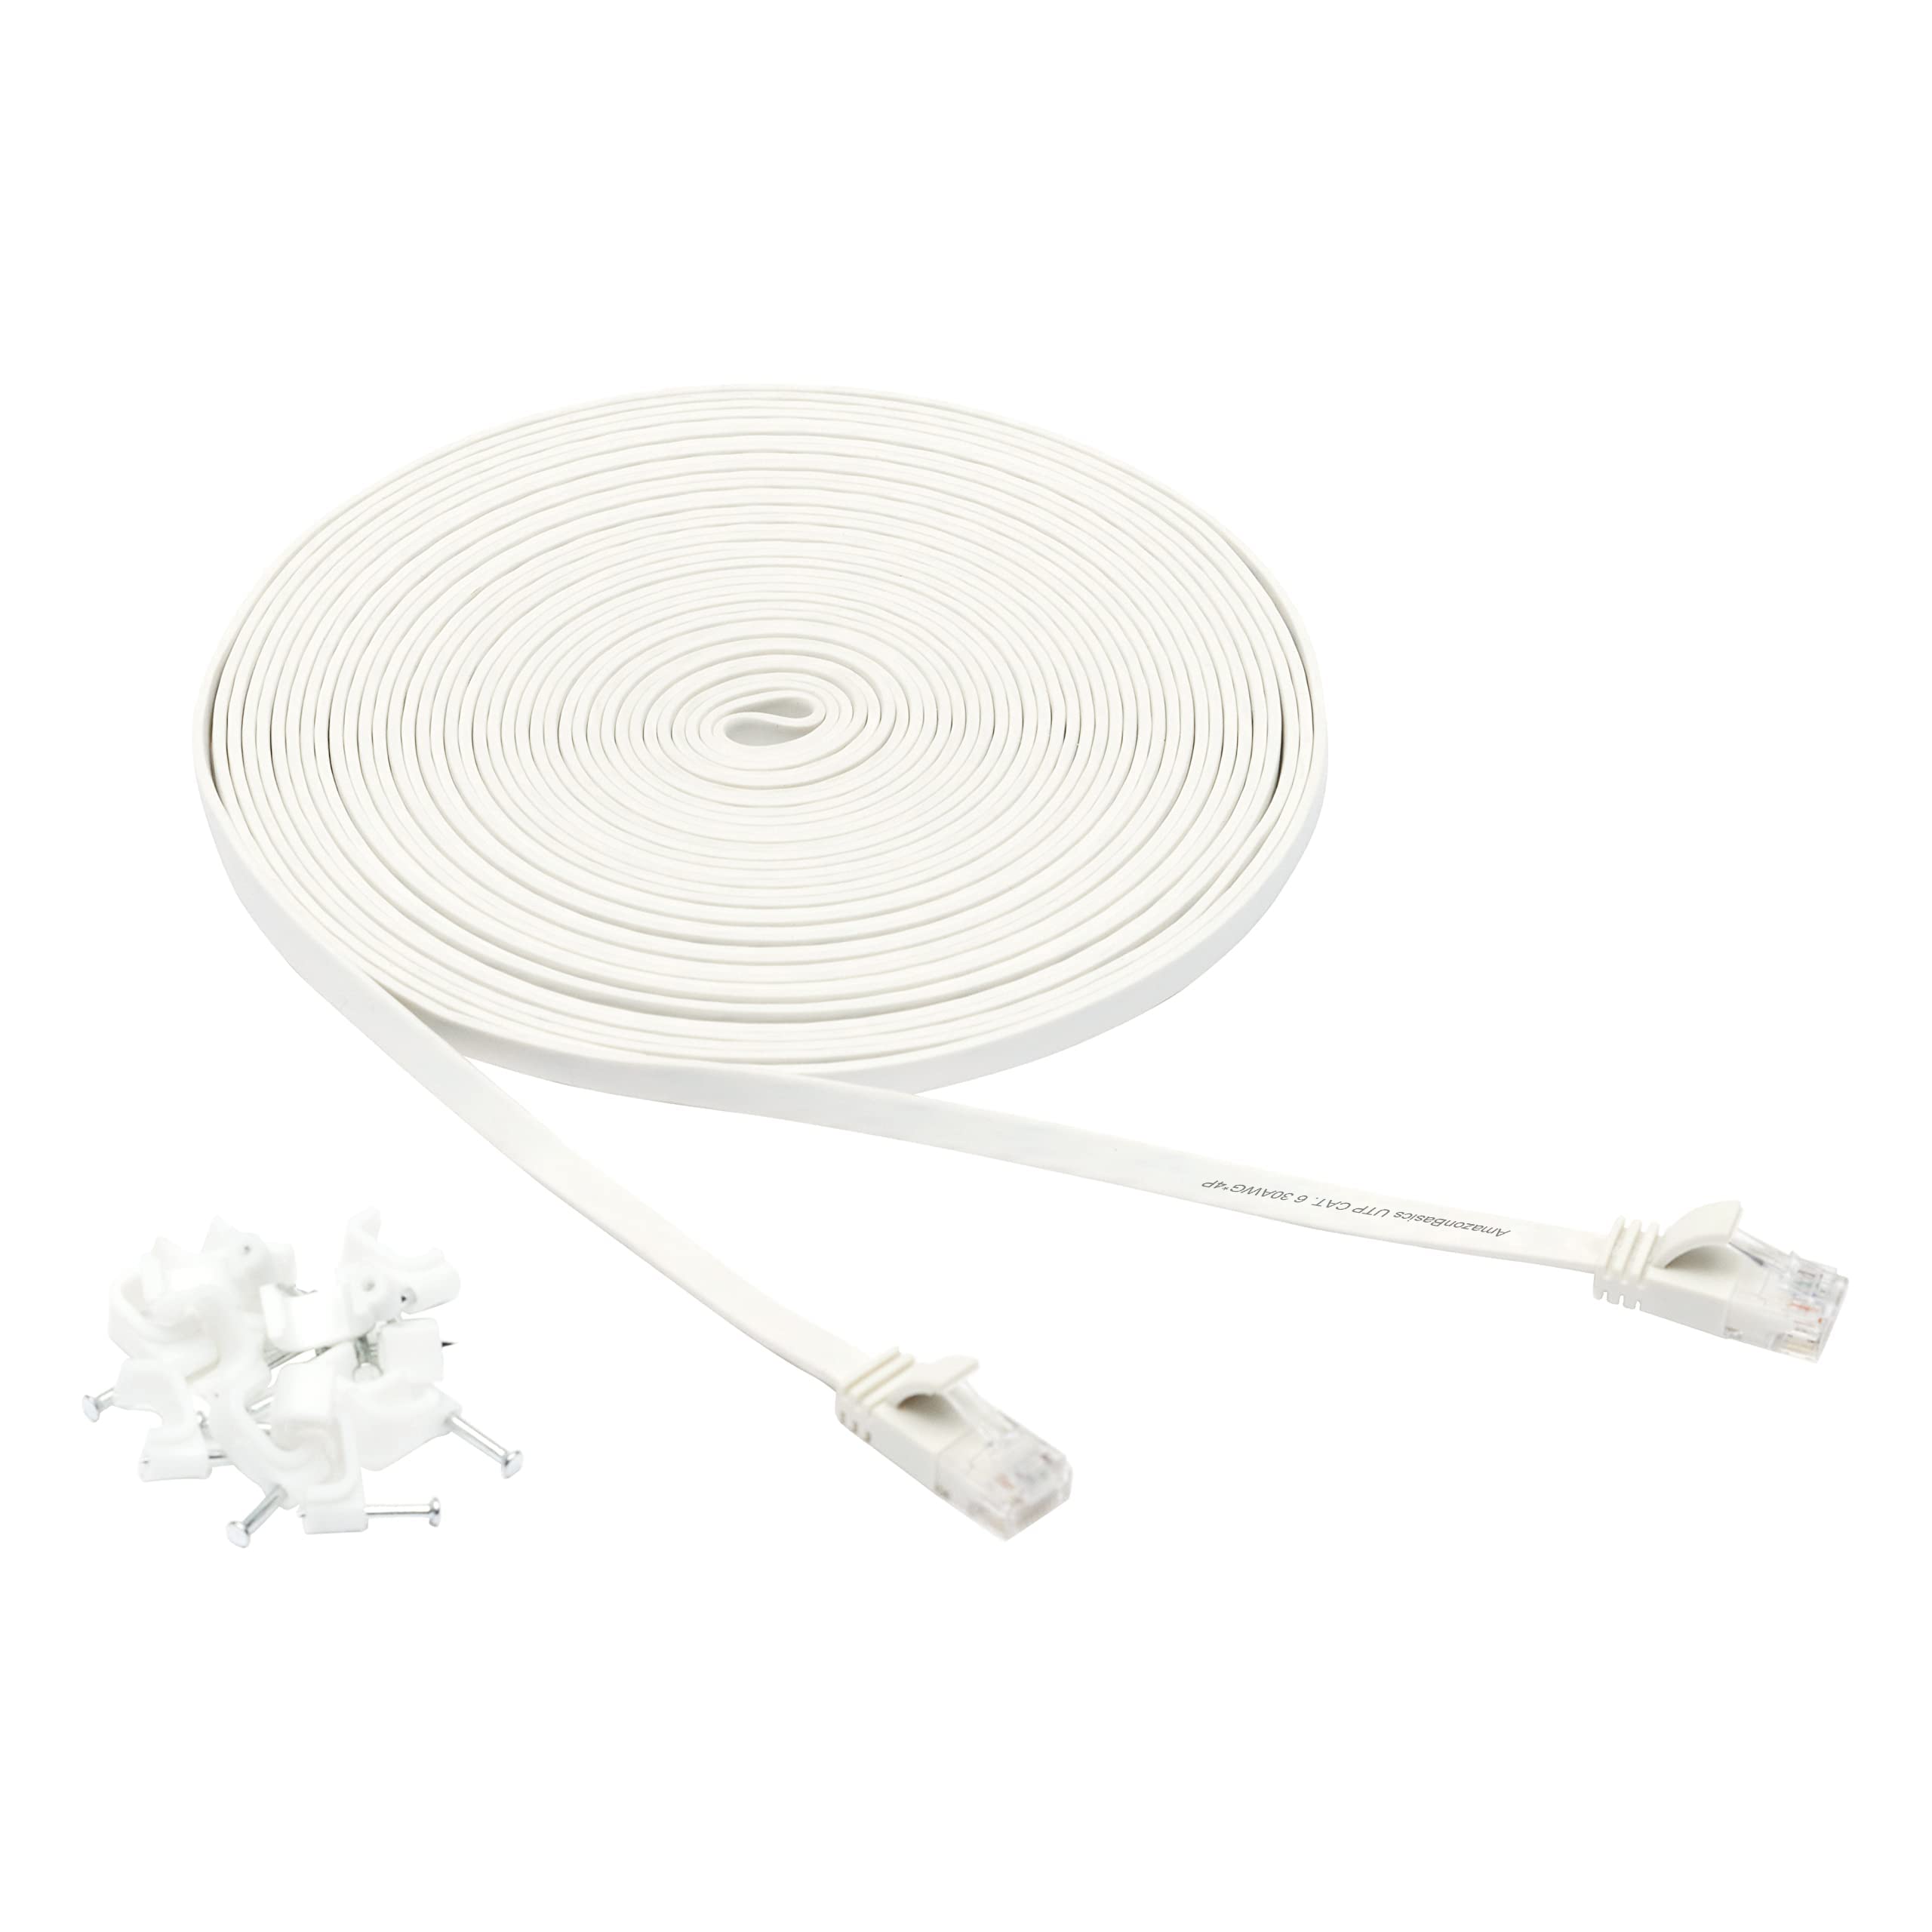 Amazon Basics RJ45 25 Foot Braided Nylon Cat 7 Ethernet Patch Cable $2.26 - AND MORE